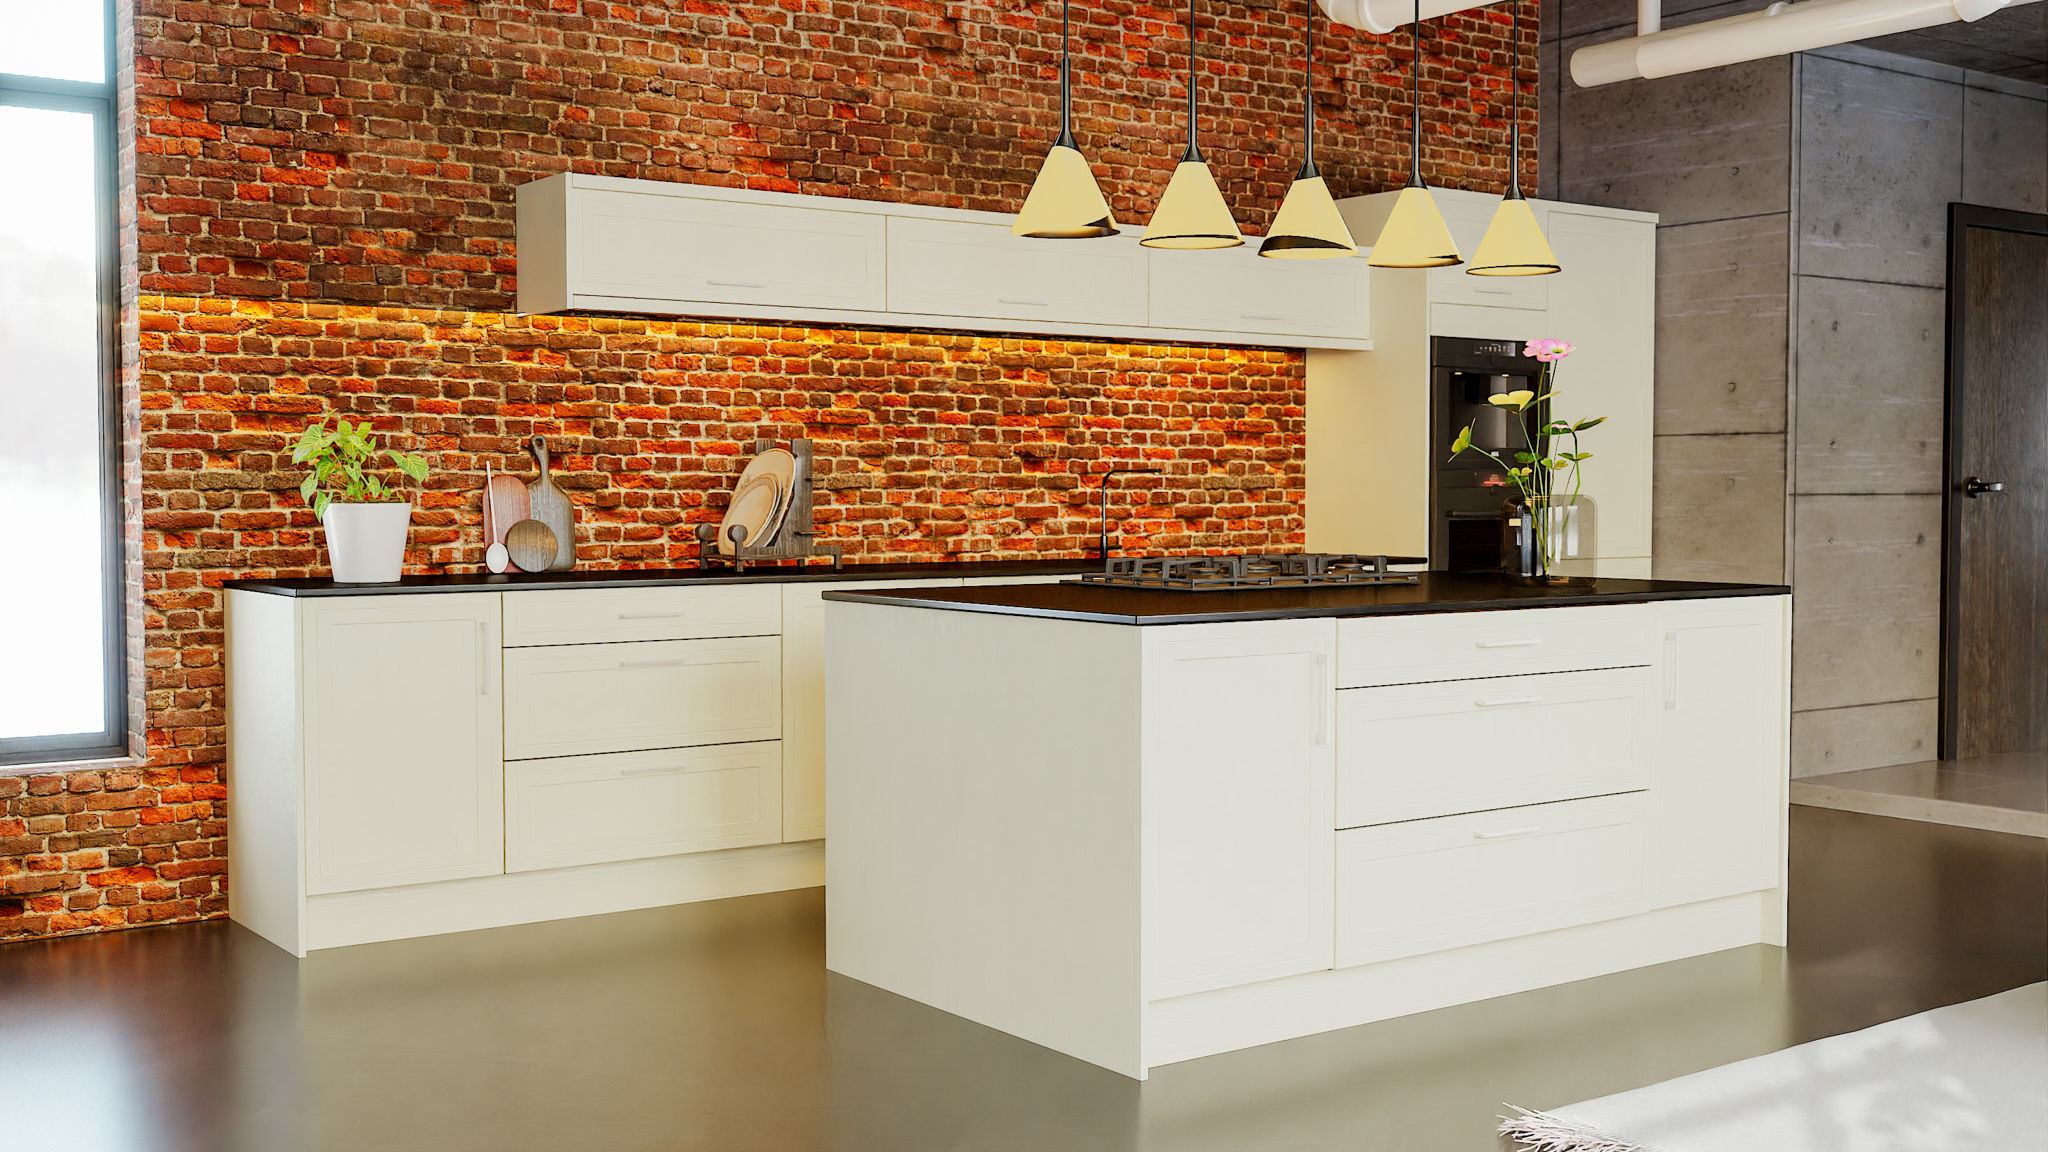 Mock inframe Arrington porcelain kitchens styled to offer a bespoke look with the durability of porcelain